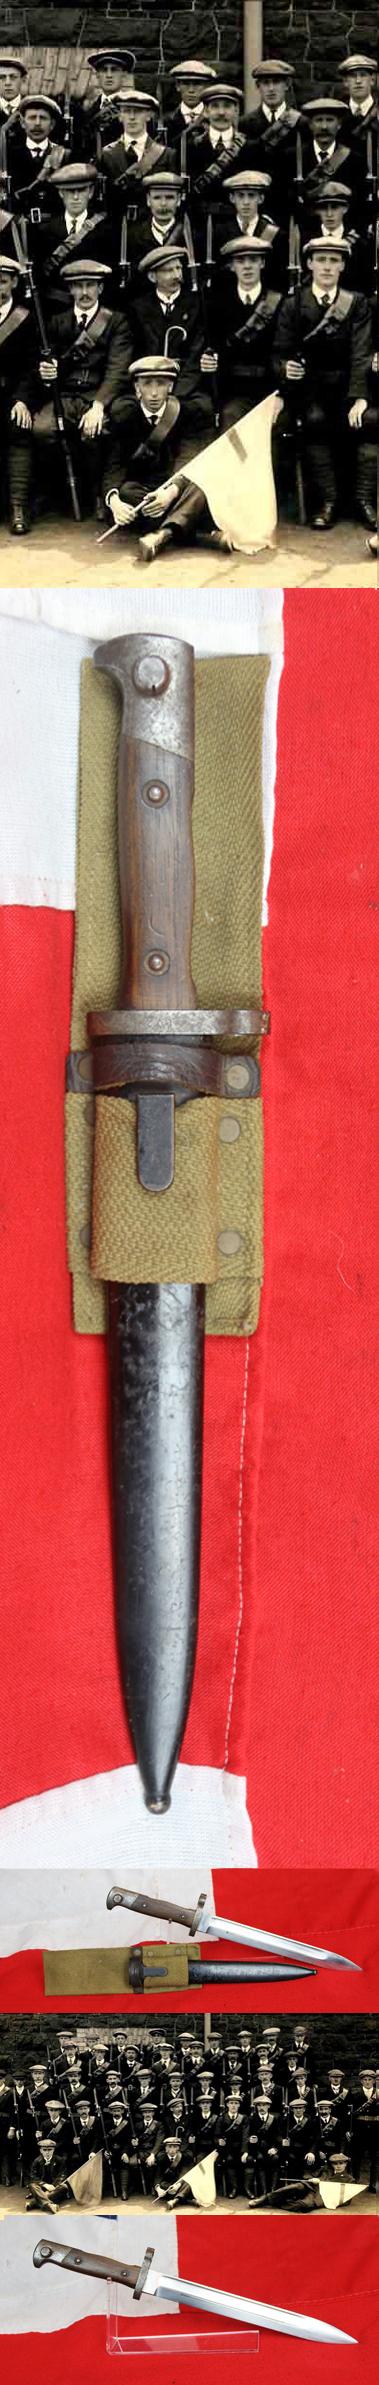 A Good and Rare Provenance, Historical, Irish 1910’s-1920's ‘Gun- Runners’ Ulster Volunteer Force U.V.F. Issue Steyr Knife Bayonet With Original Frog